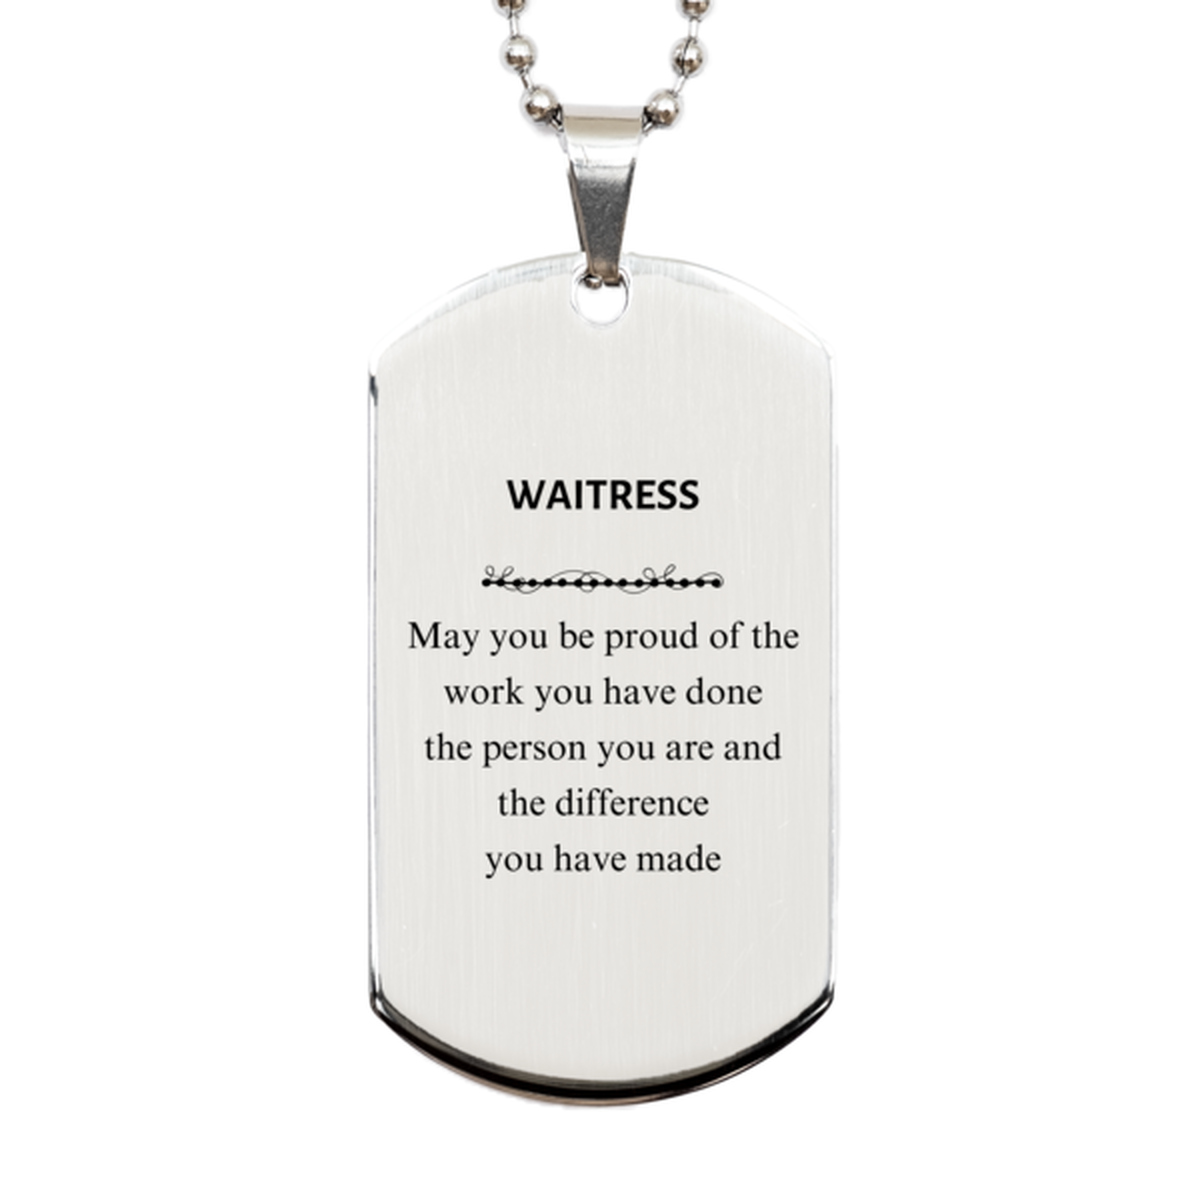 Waitress May you be proud of the work you have done, Retirement Waitress Silver Dog Tag for Colleague Appreciation Gifts Amazing for Waitress